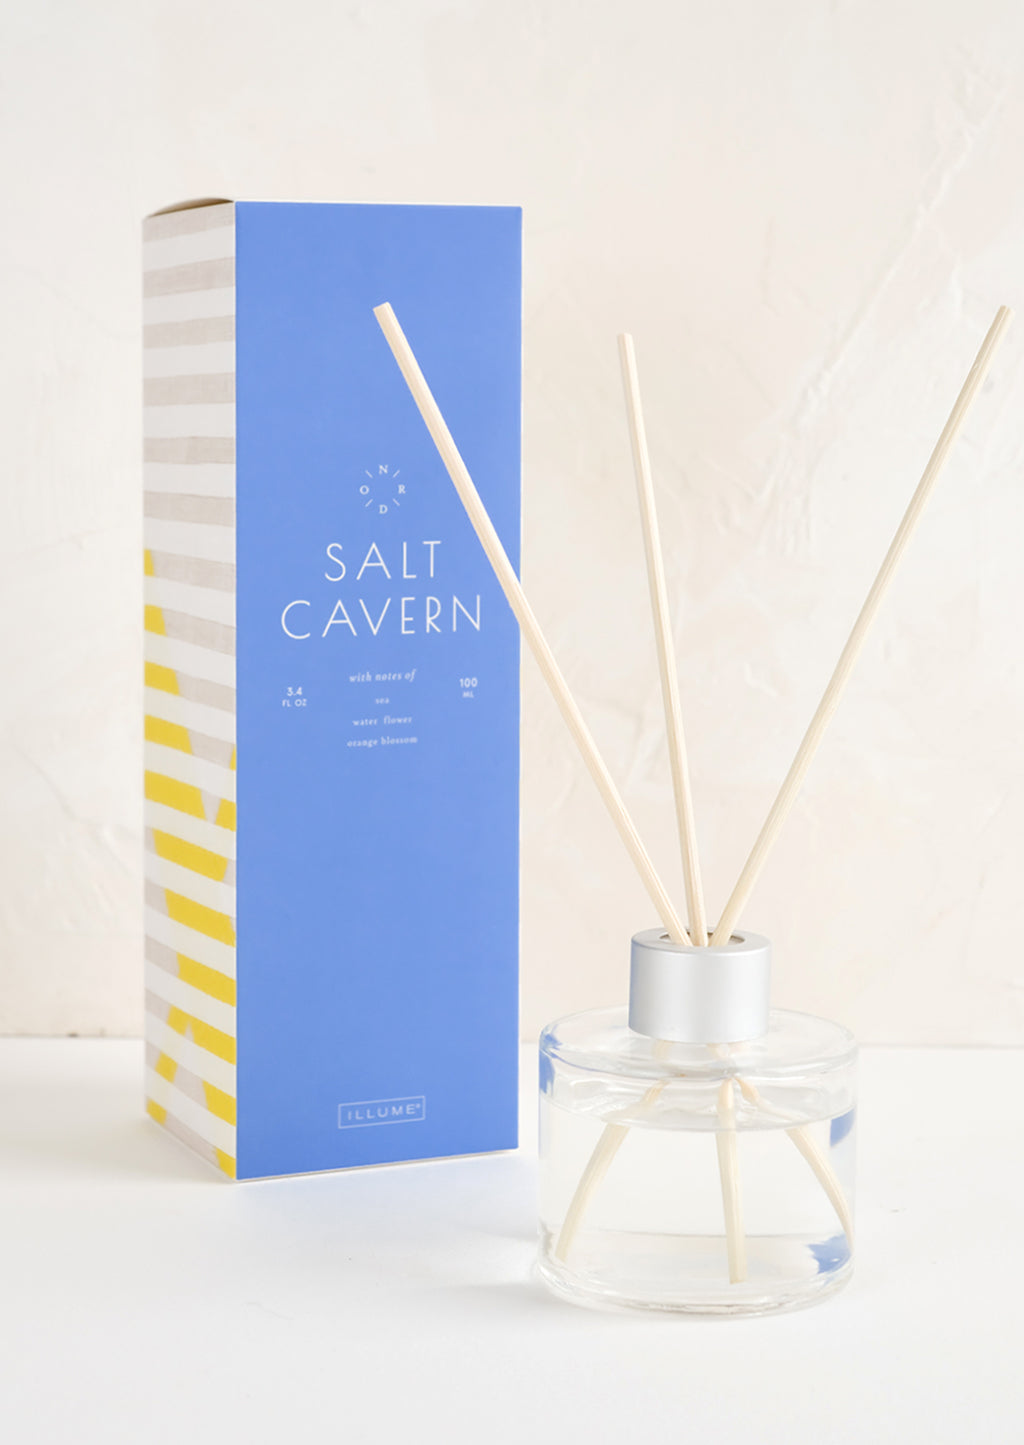 Salt Cavern: A tall box with glass reed diffuser bottle.